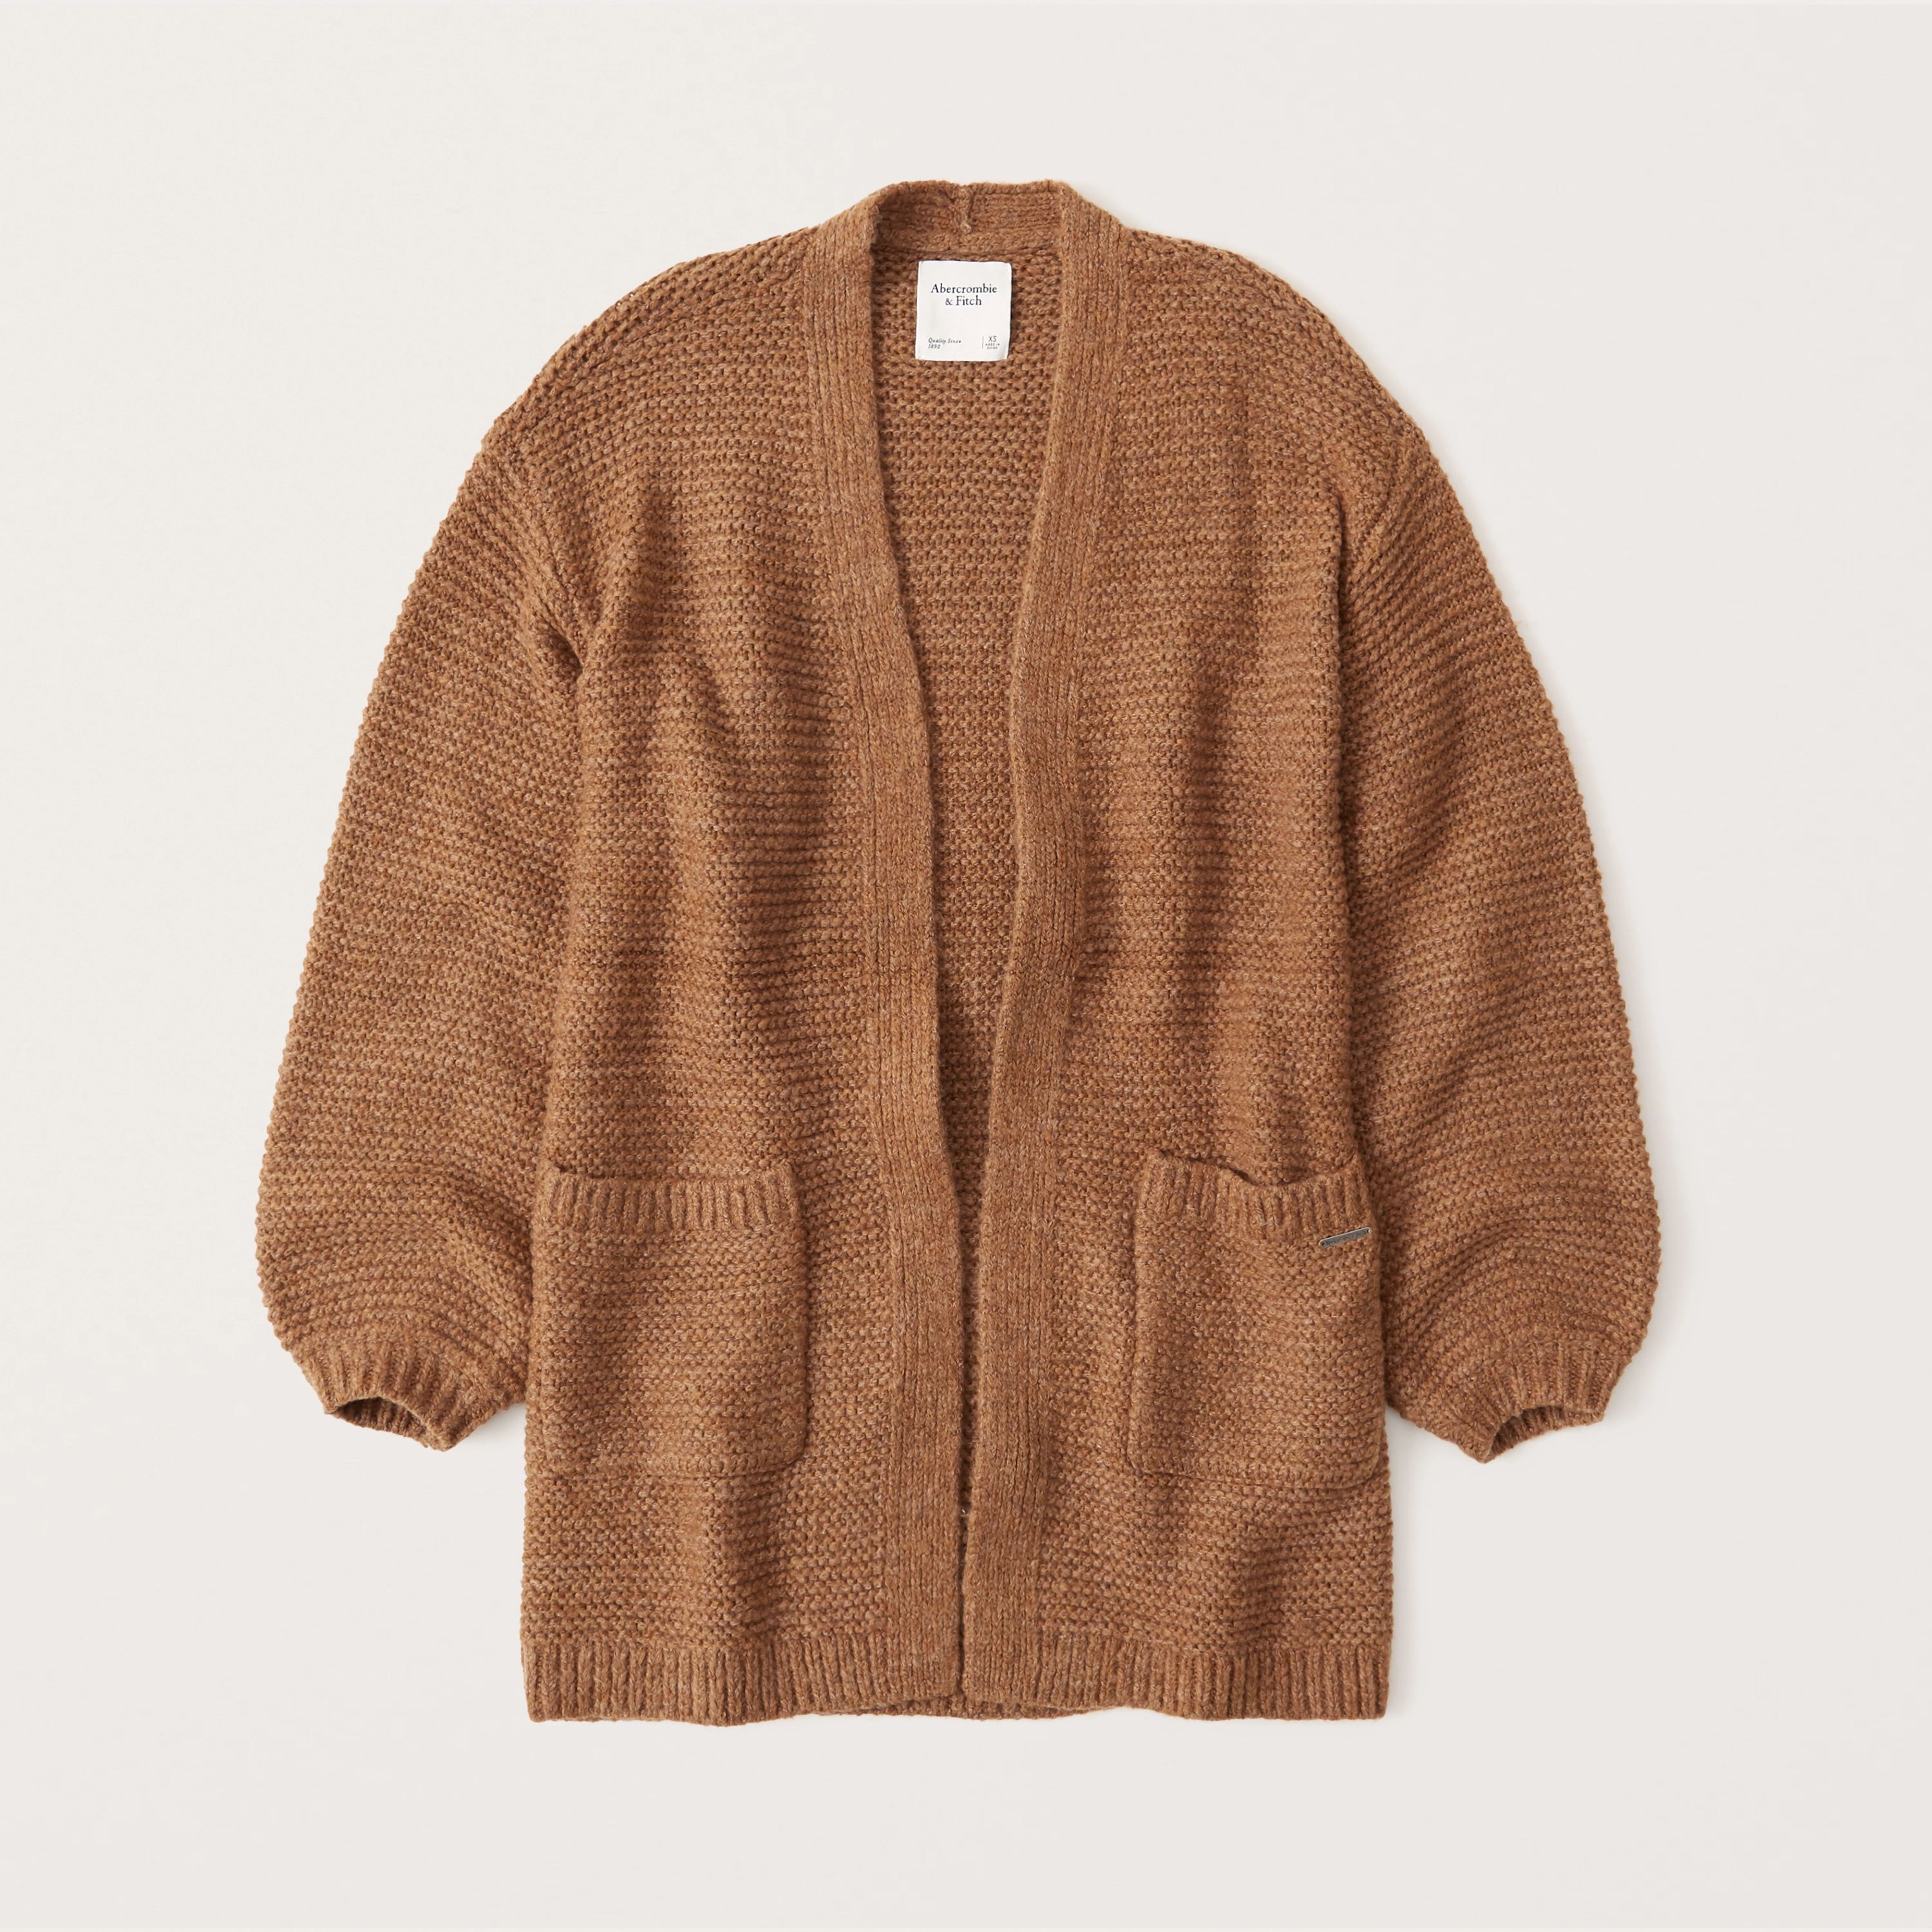 Puff Sleeve Long Cardigan
					



		
	



	
		Exchange Color / Size
	


	

	

	
		


  Was $79, ... | Abercrombie & Fitch (US)